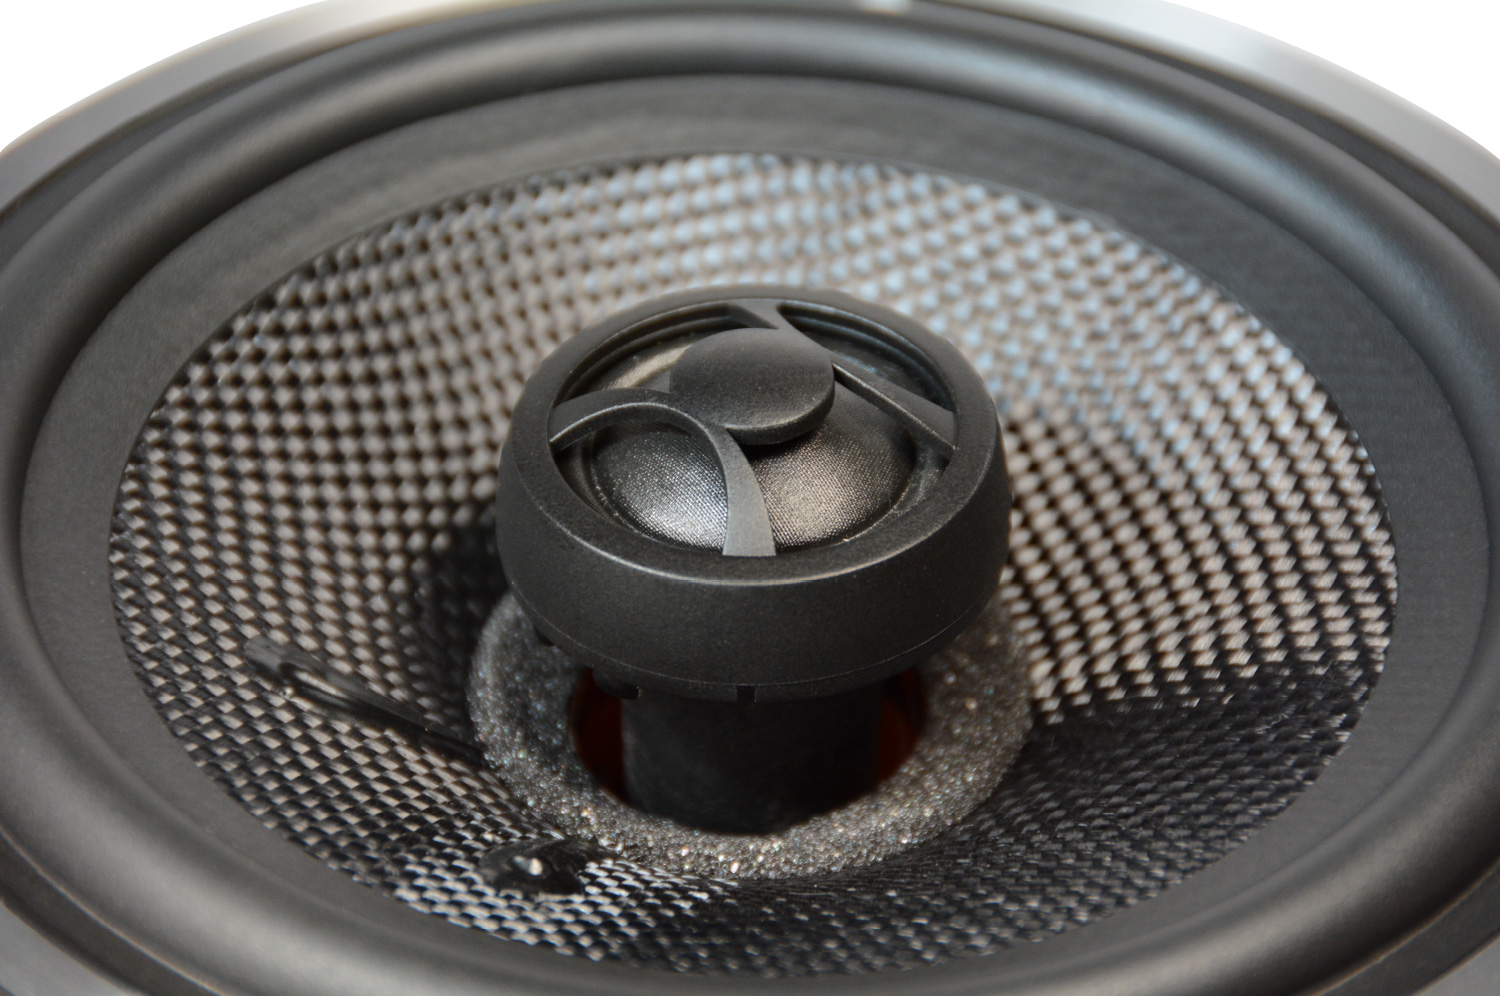 ARC602 Coaxial Speaker Review